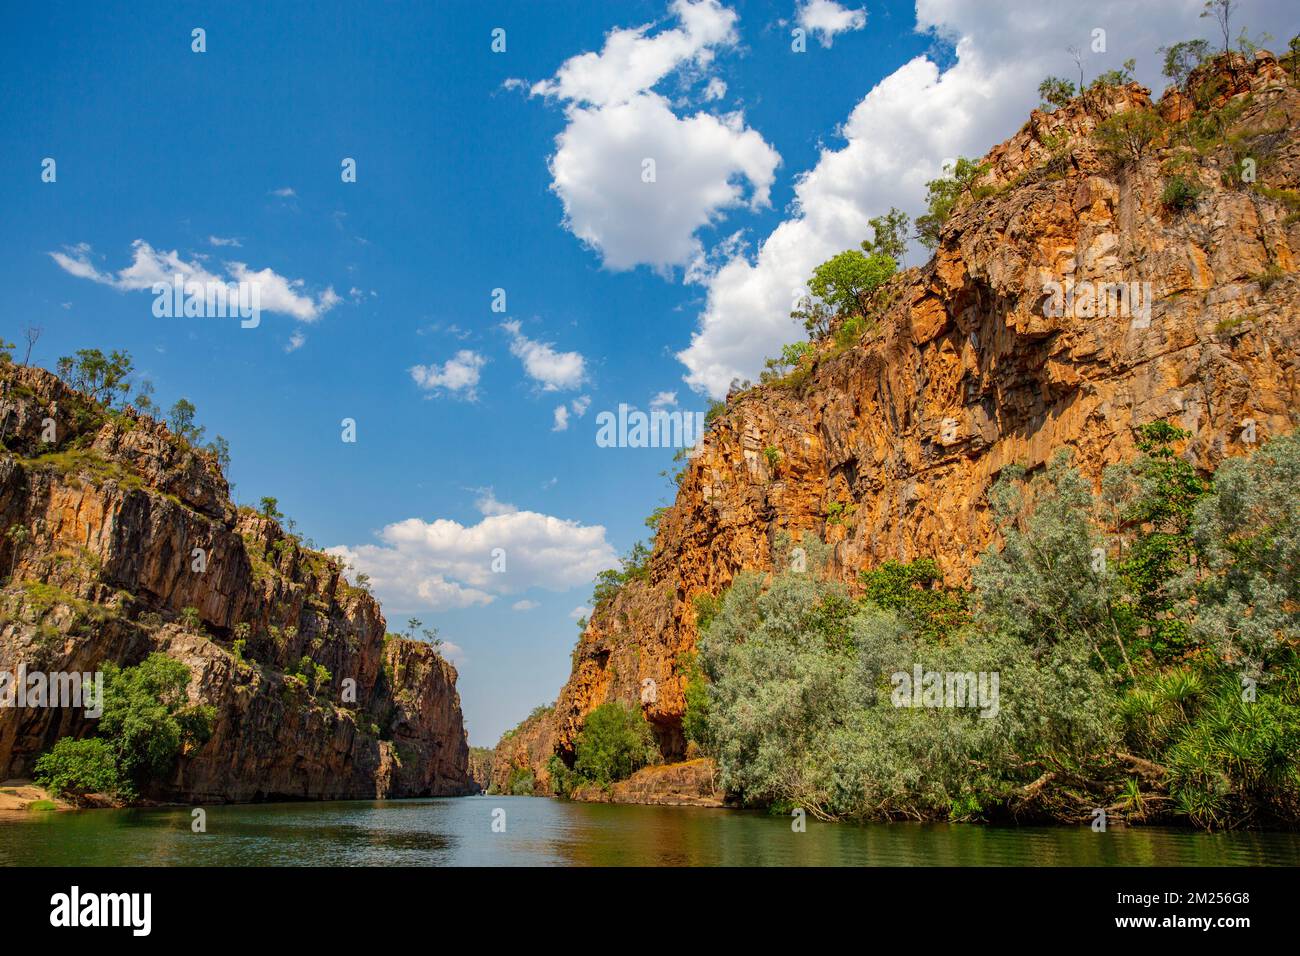 View of the Katherine River and its deep gorge carved through ancient sandstone, in Nitmiluk (Katherine Gorge) National Park, Northern Territory, Aust Stock Photo